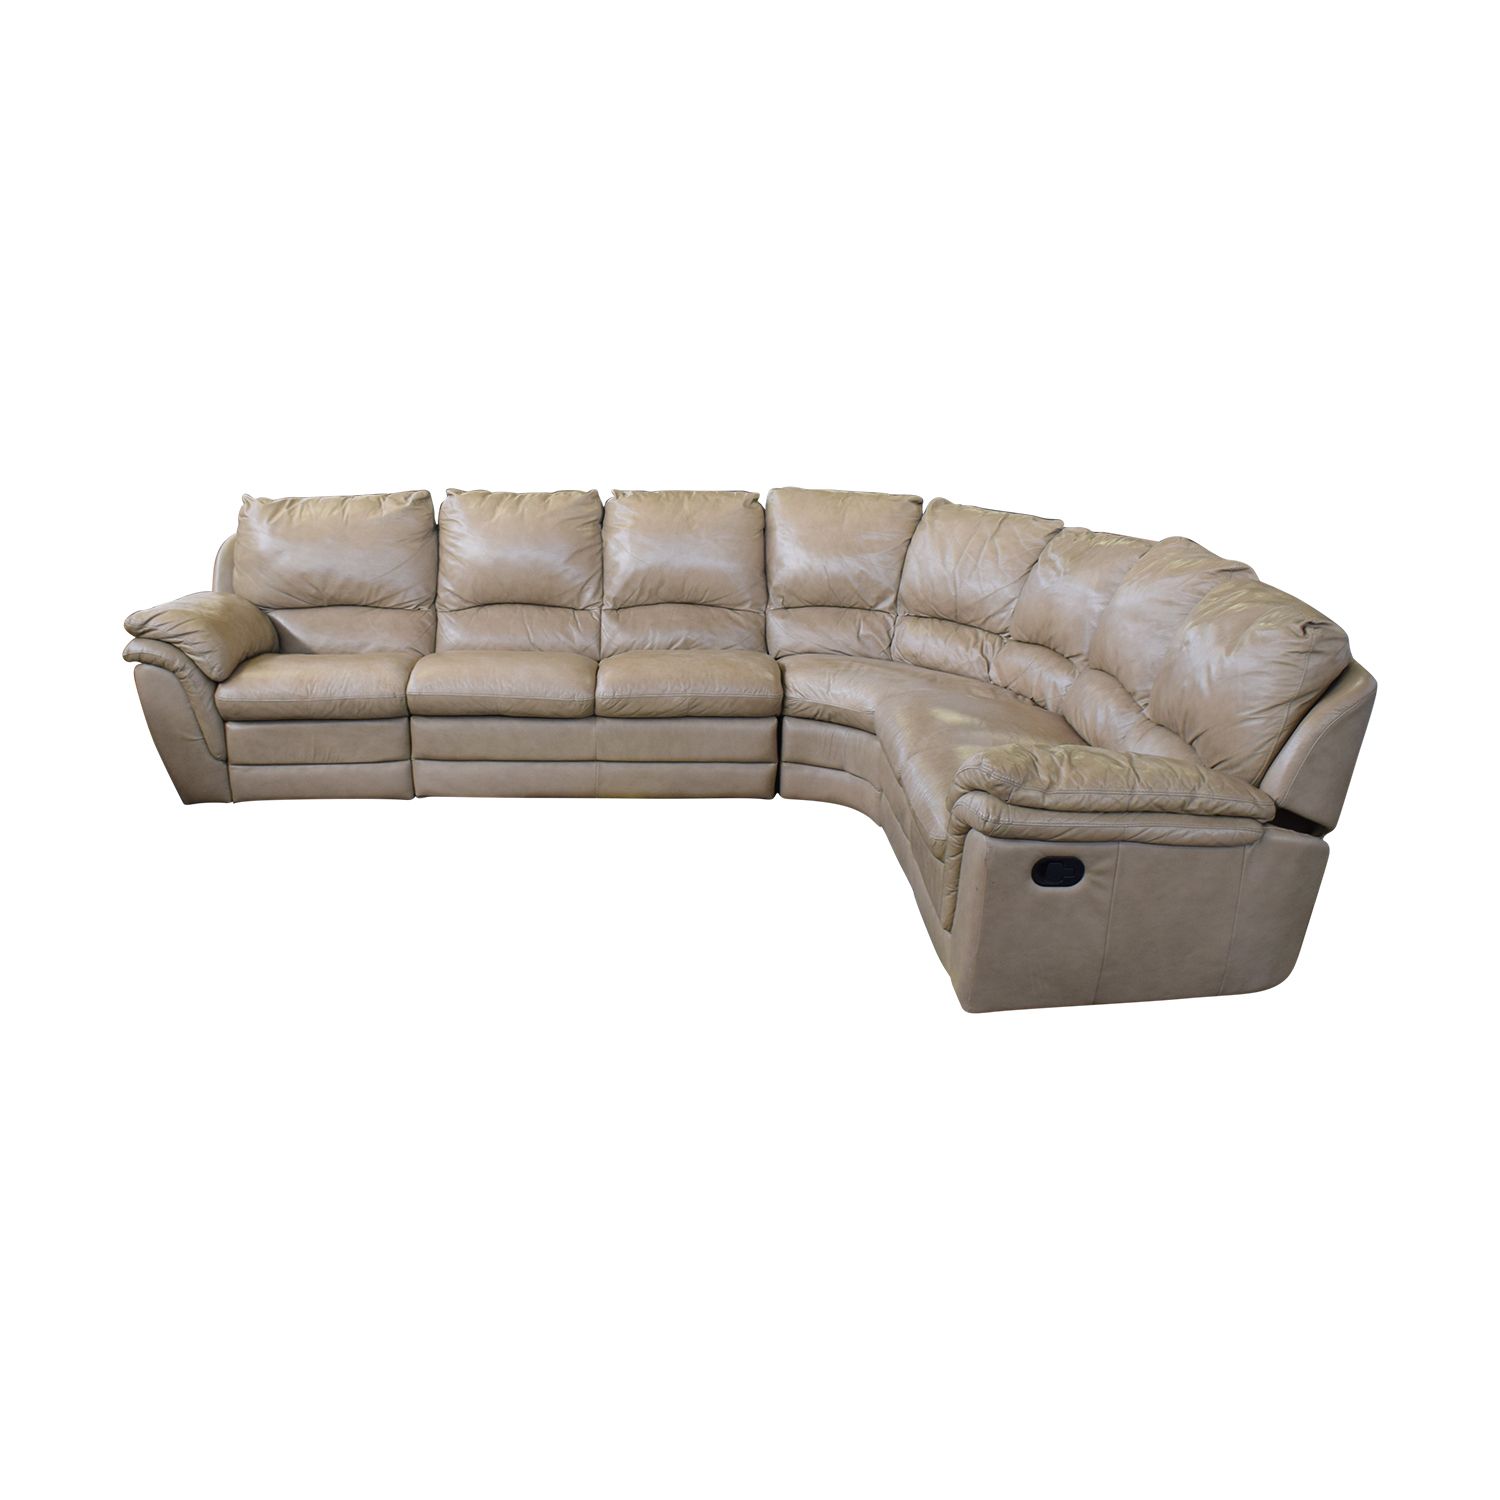 90% Off – Beige L Shaped Sectional / Sofas Within Beige L Shaped Sectional Sofas (View 18 of 20)